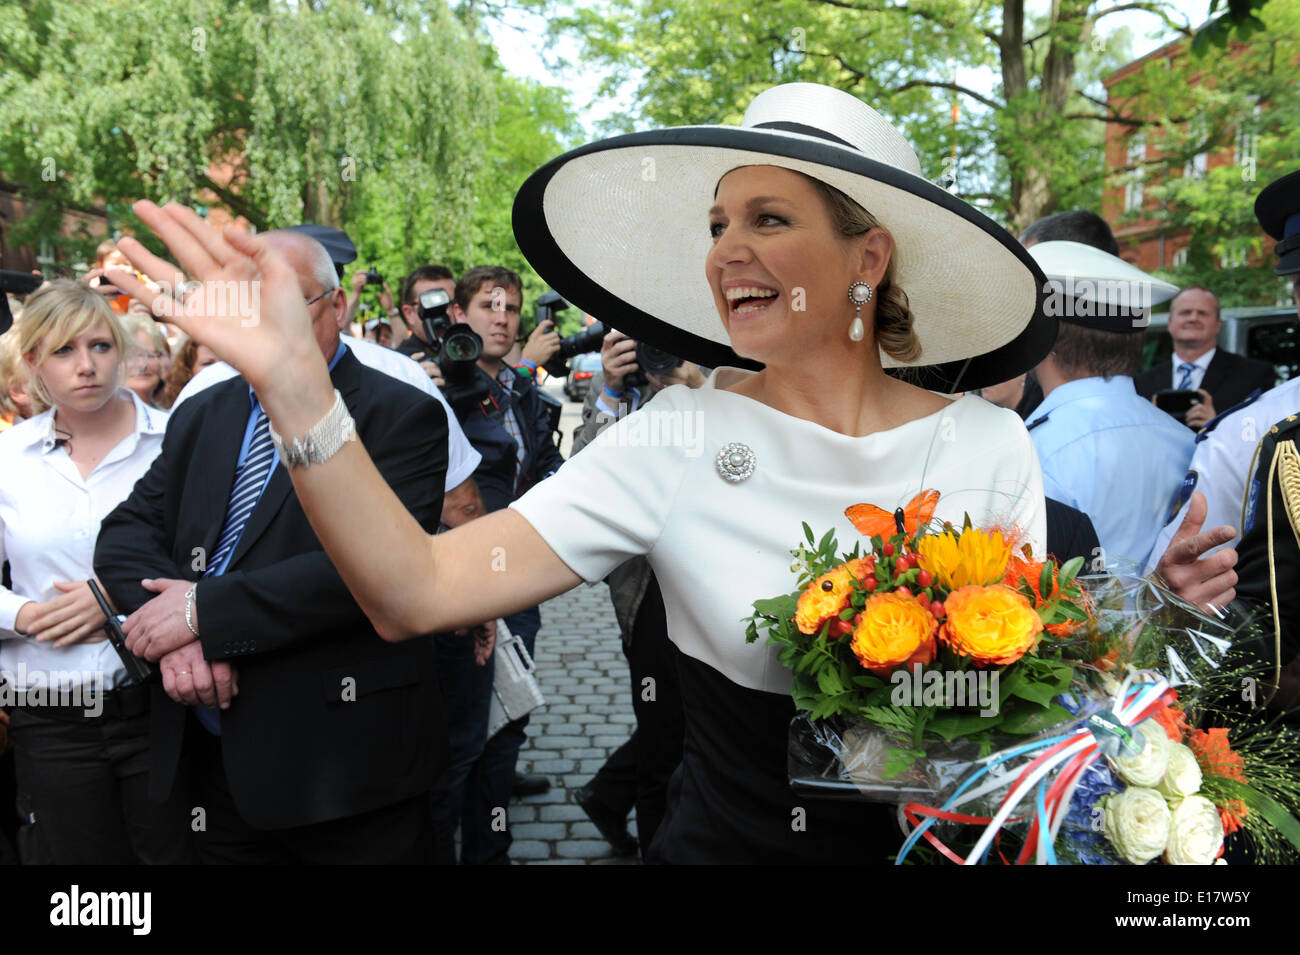 Leer, Germany. 26th May, 2014. Dutch Queen Maxima waves in Leer, Germany, 26 May 2014. The royal couple is on a two-day visit to Germany. Photo: CARMEN JASPERSEN/dpa/Alamy Live News Stock Photo